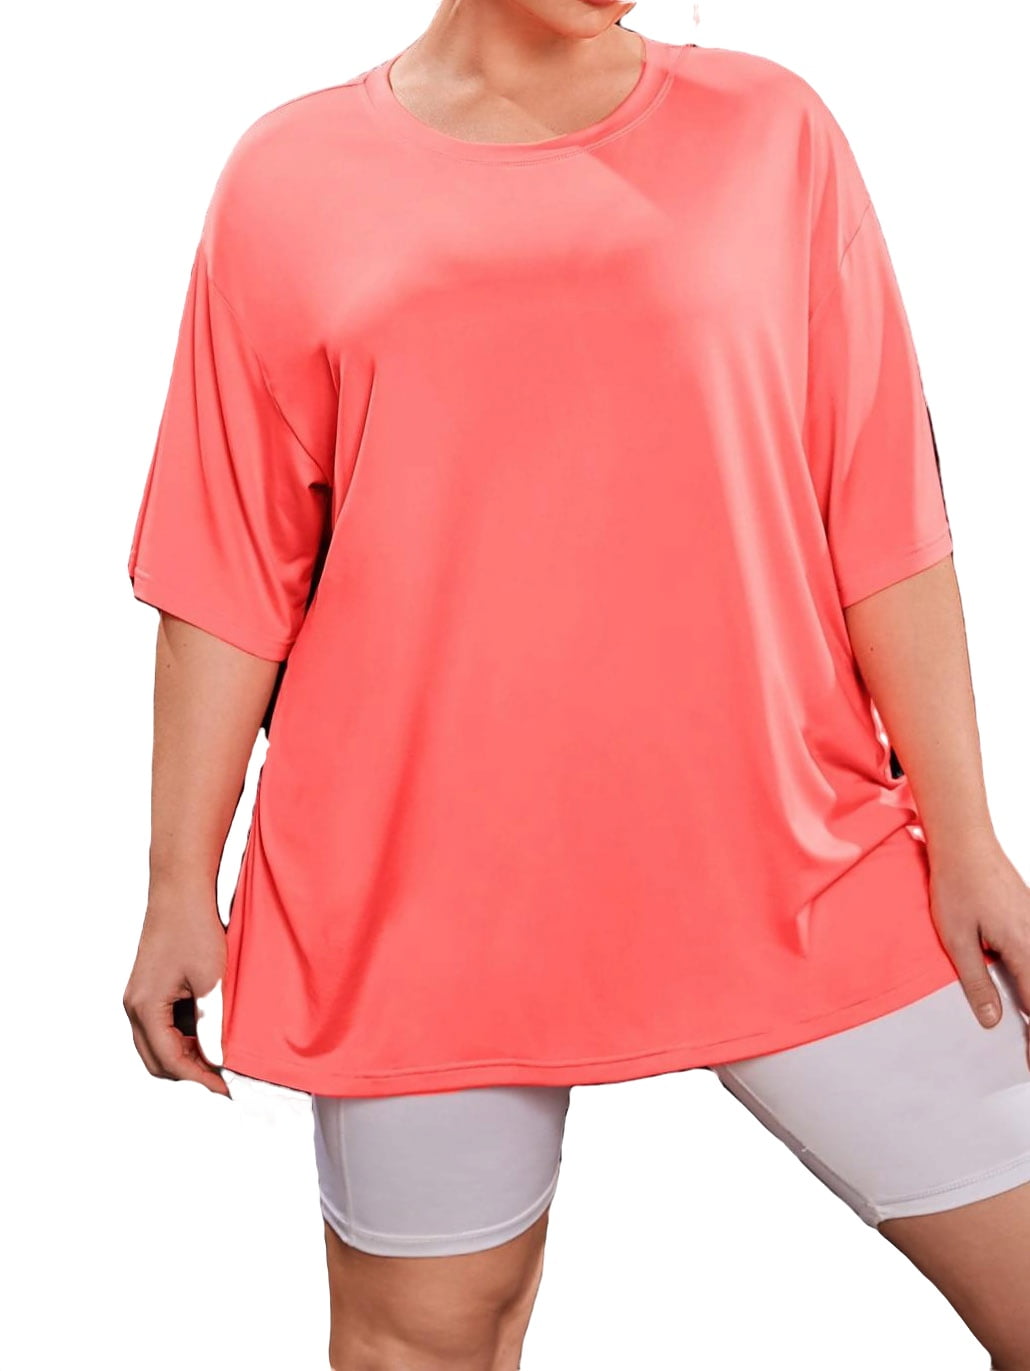 Women's Plus Size Drop Shoulder Solid Sports Top Fitness Gym Yoga Running  Shirt Workout 2XL(16) 